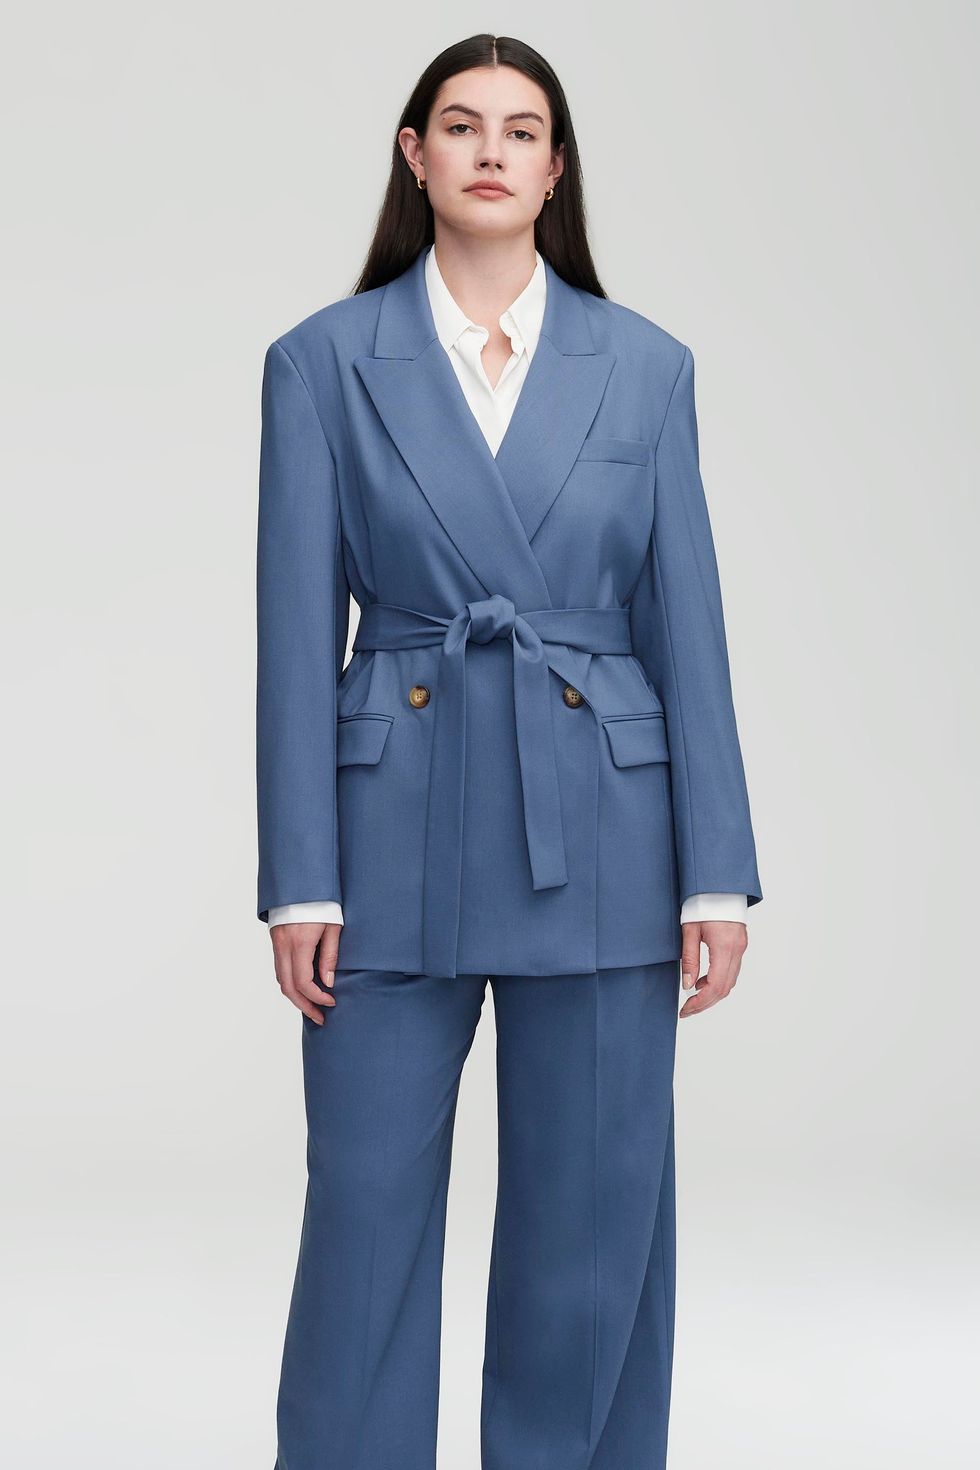 Light Blue Womens Blazer Suit, Office Women 3 Piece Suit With Slim Fit  Pants, Buttoned Vest and Single-breasted Blazer,office Wear for Women -   Canada